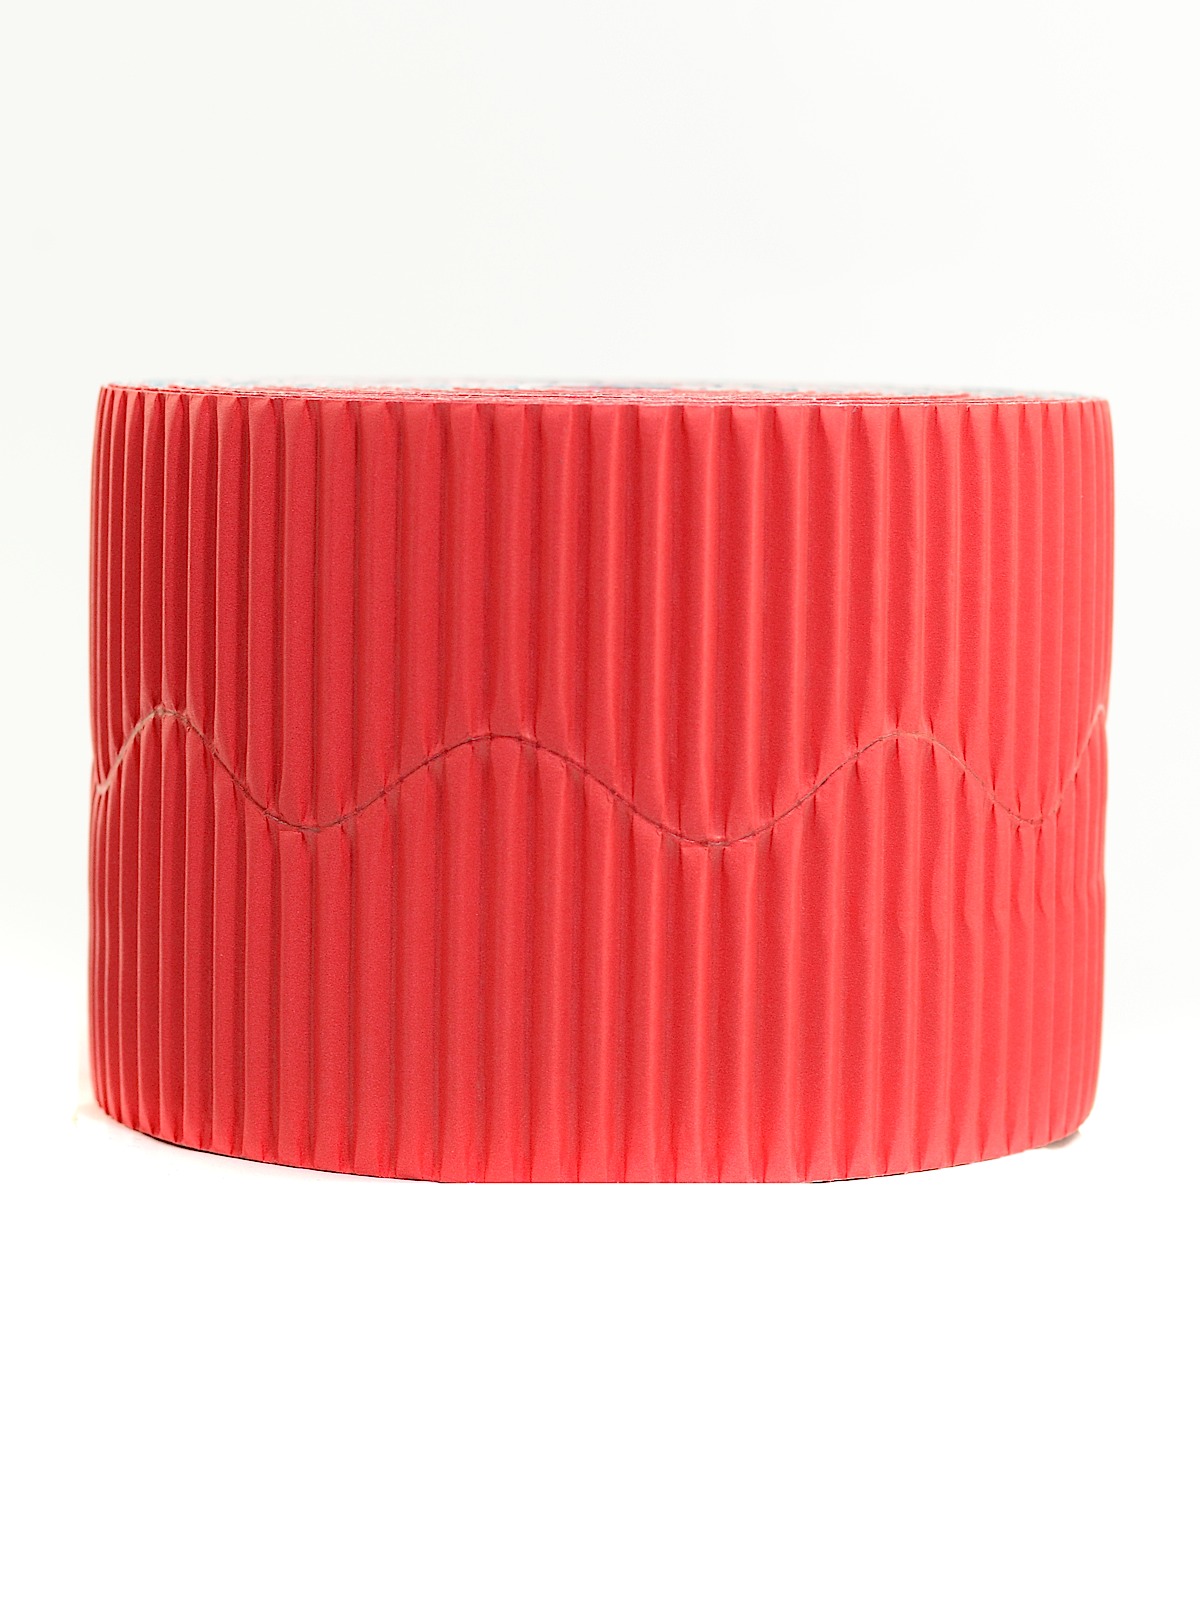 Bordette Corrugated Roll Flame Red